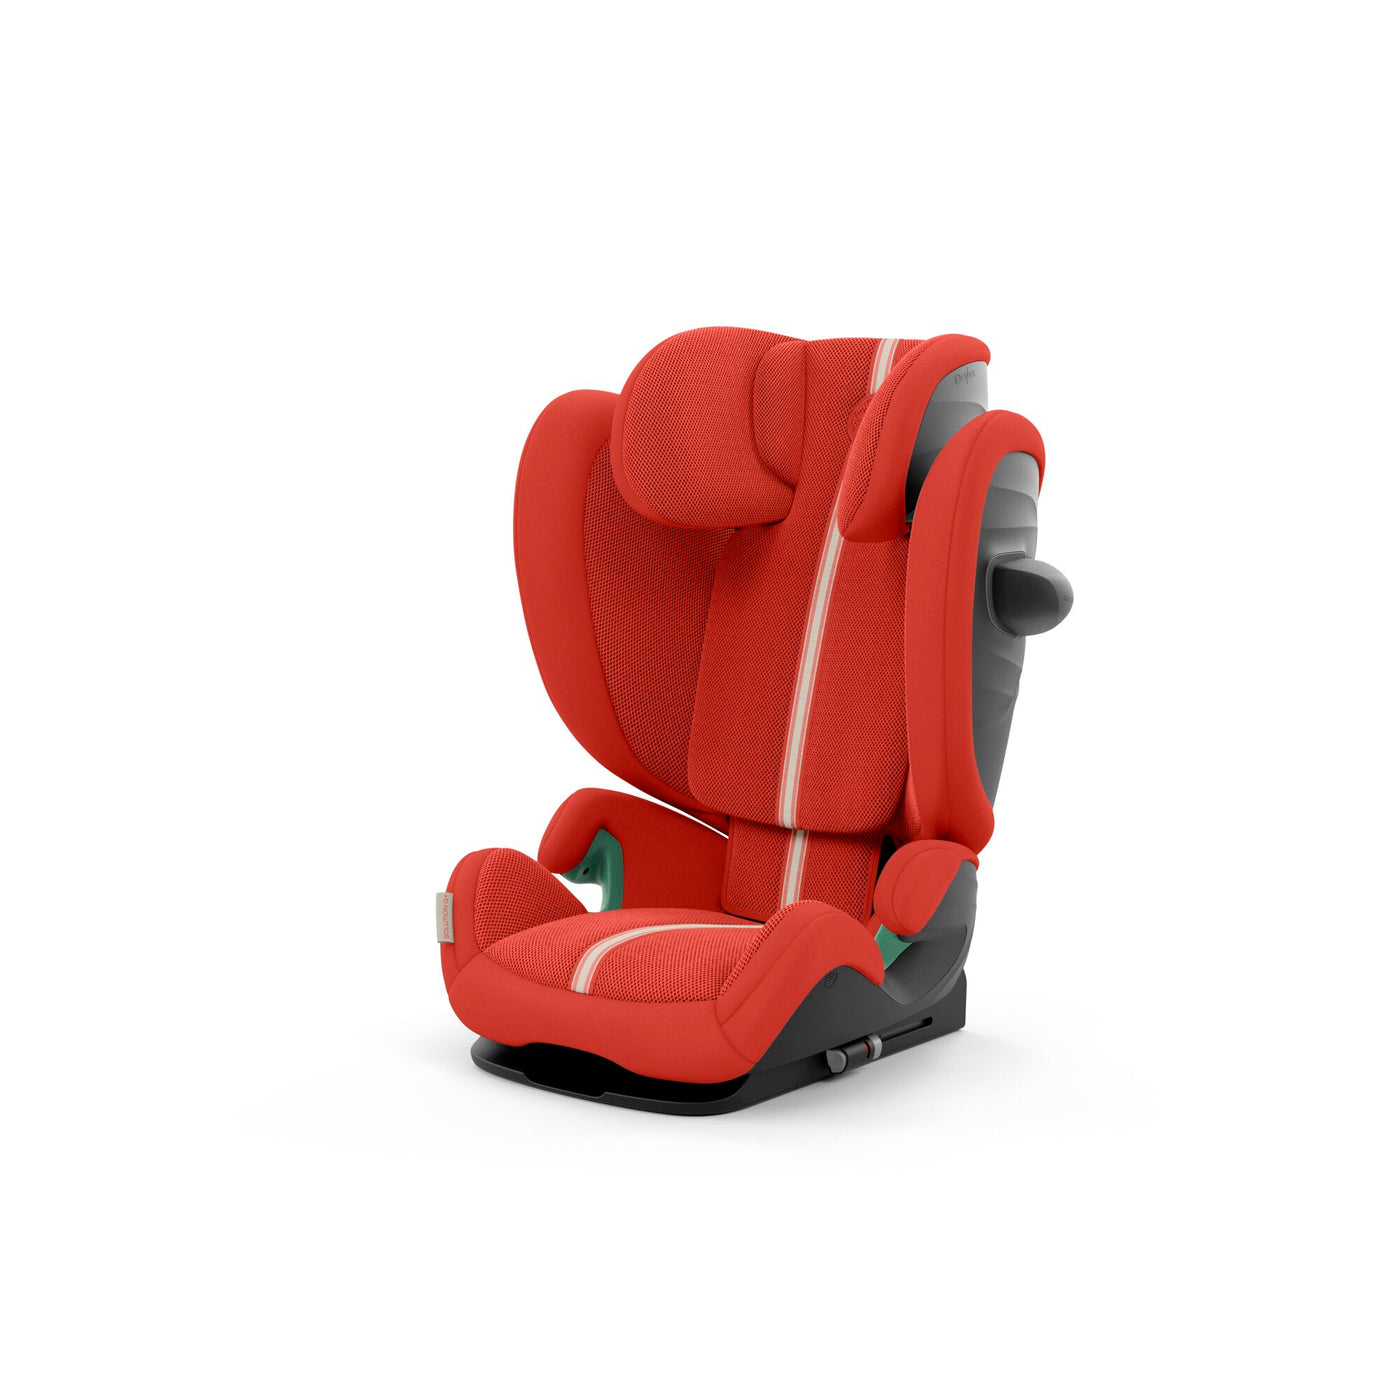 Cybex Solution G i-Fix PLUS Car Seat - Hibiscus Red